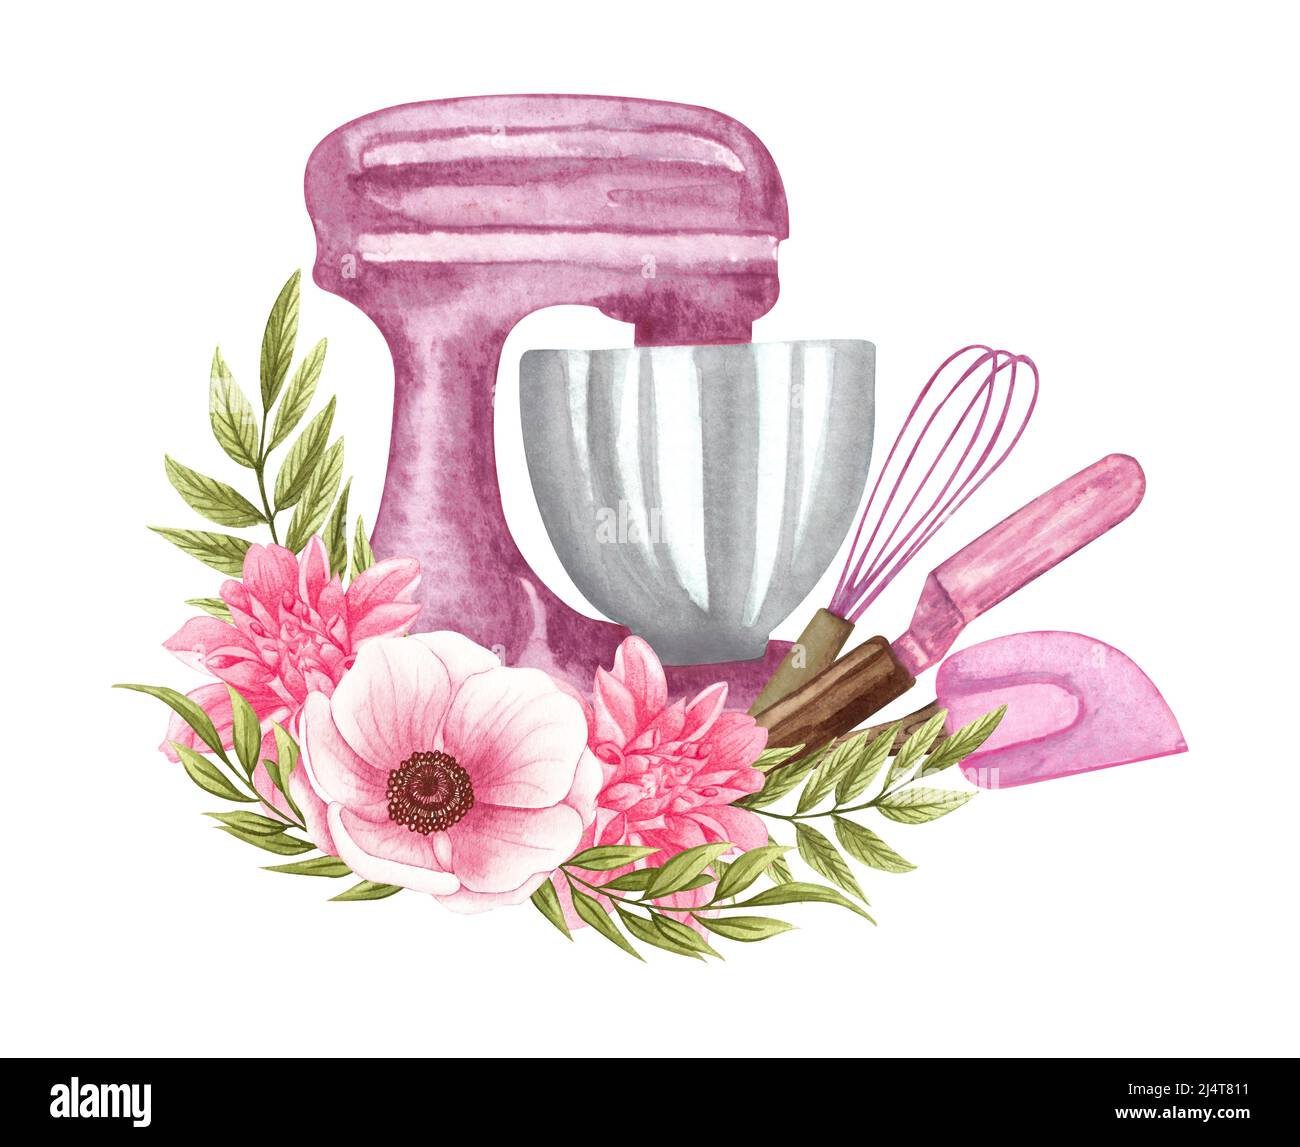 https://c8.alamy.com/comp/2J4T811/baking-watercolor-illustration-with-kitchen-utensils-in-a-clay-jag-polling-pin-whisk-spoon-with-pink-flowers-hand-drawn-cooking-baking-logo-2J4T811.jpg